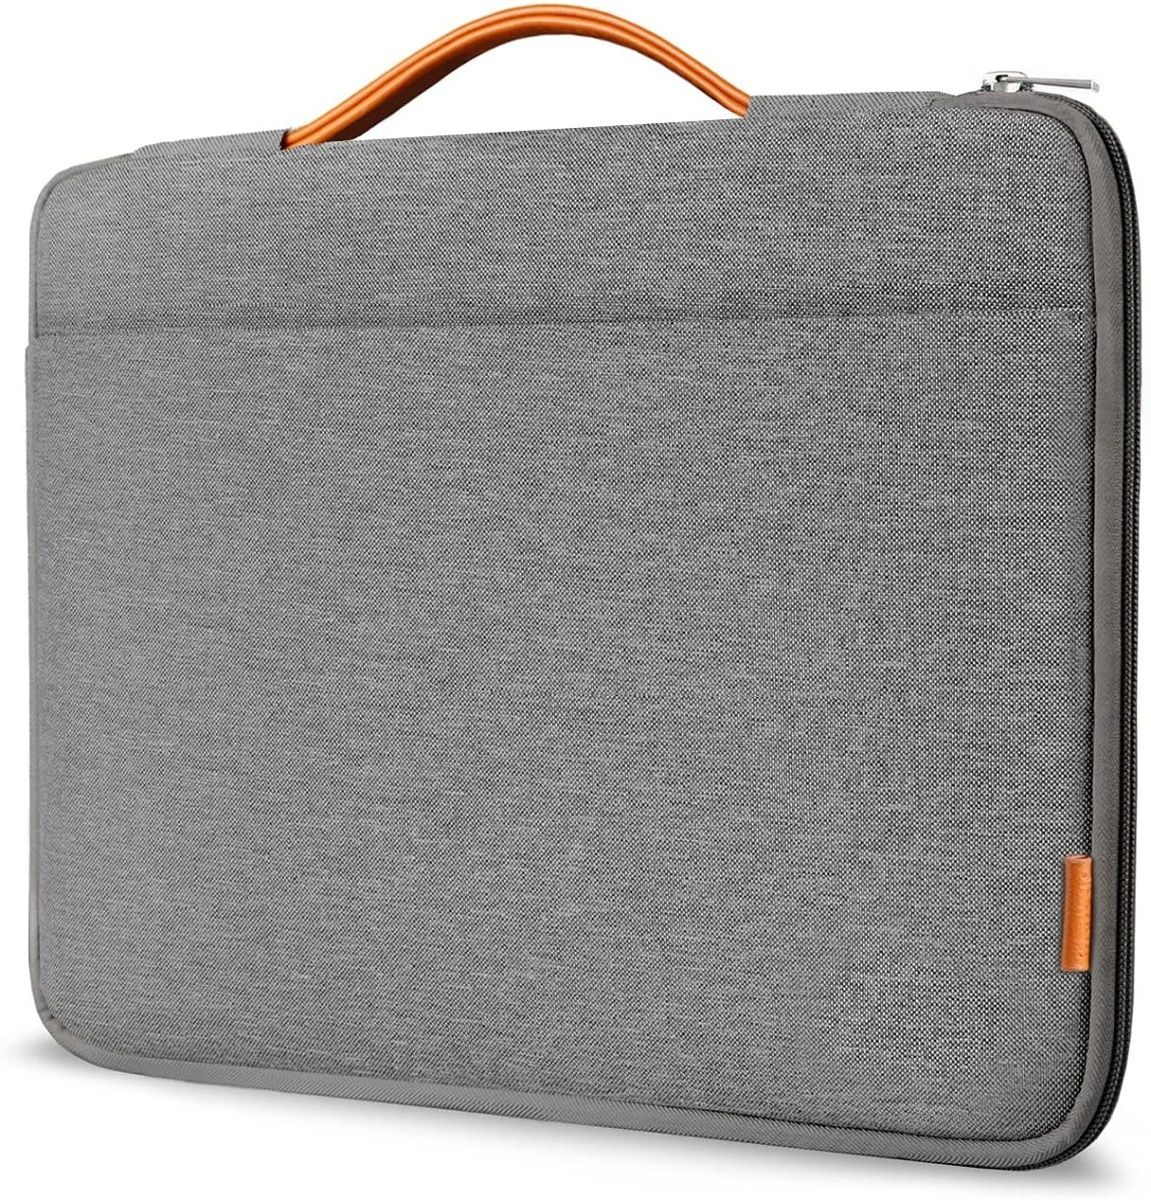 This classic Inateck laptop sleeve comes with a carrying handle for easier transportation. It has an elegant and subdued design that looks good without being too flashy. Plus, it gives you some space to store accessories.